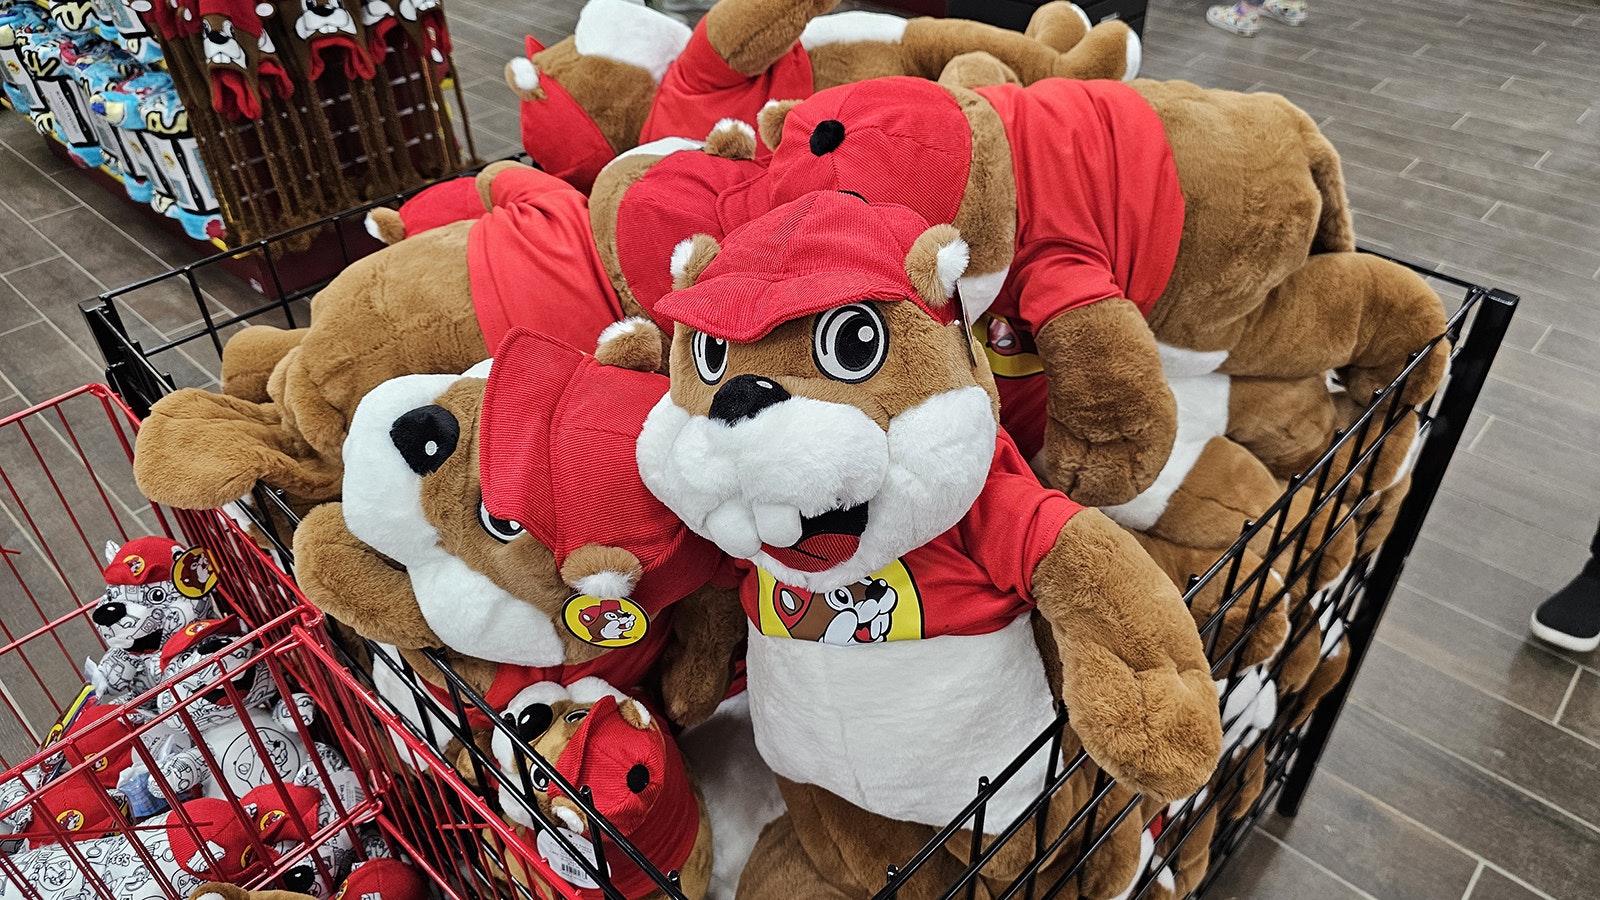 The plush Buc-ee's beaver mascot comes in all sorts of sizes.